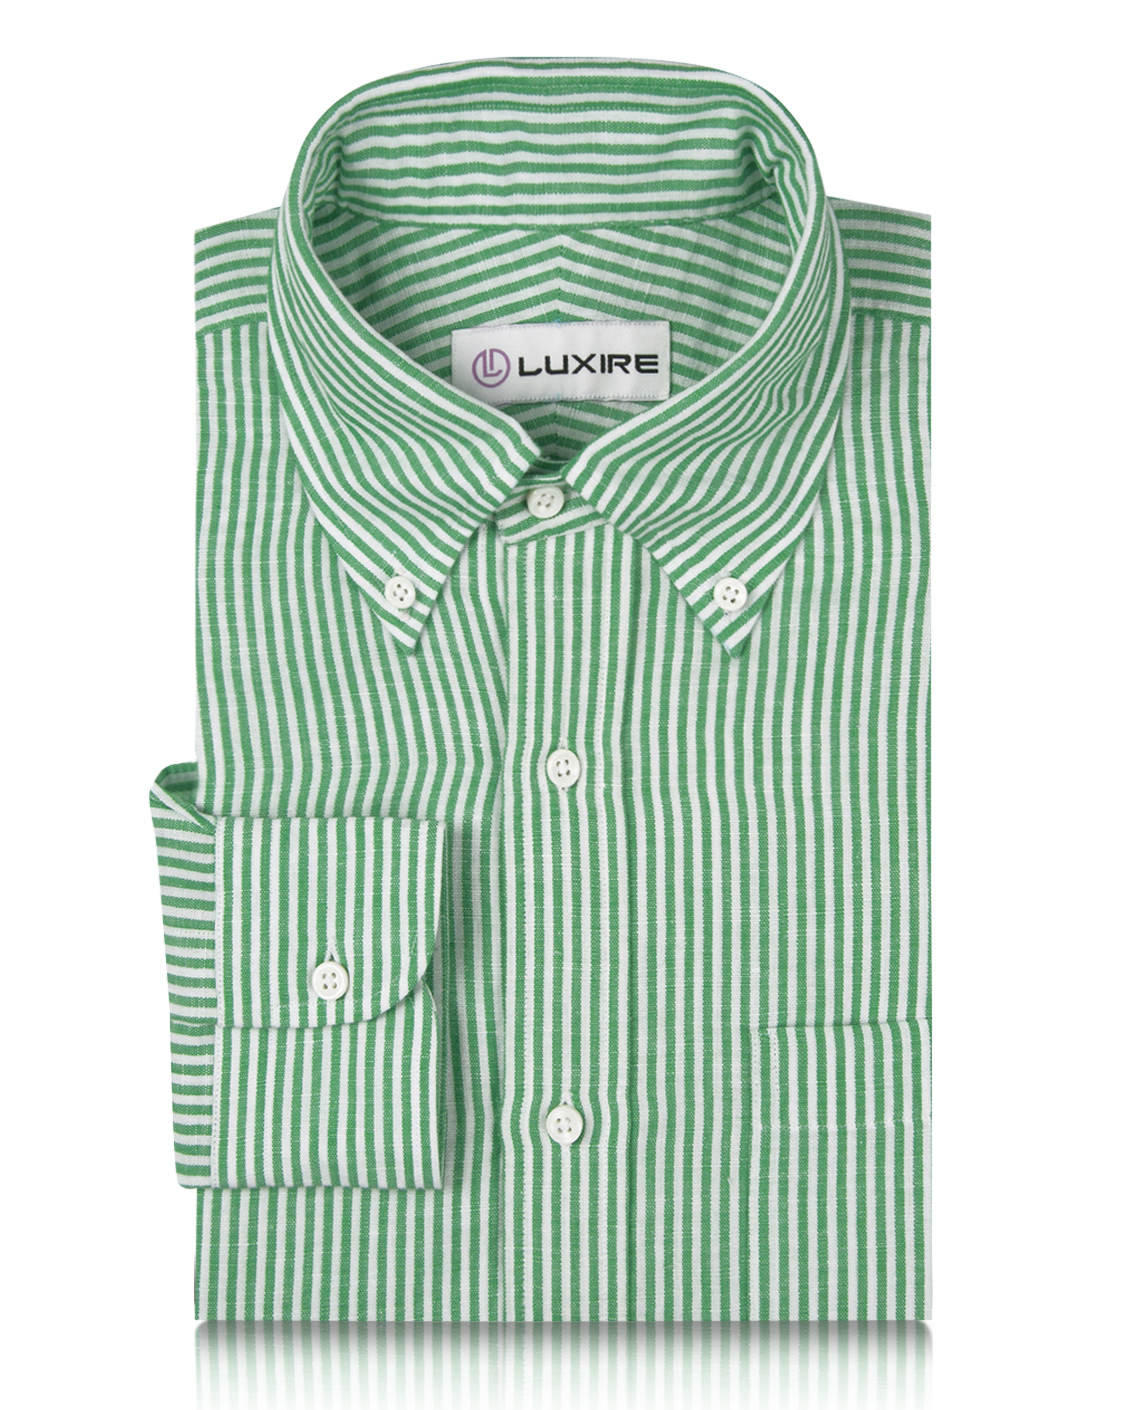 Front of the custom linen shirt for men in green and white candy stripes by Luxire Clothing